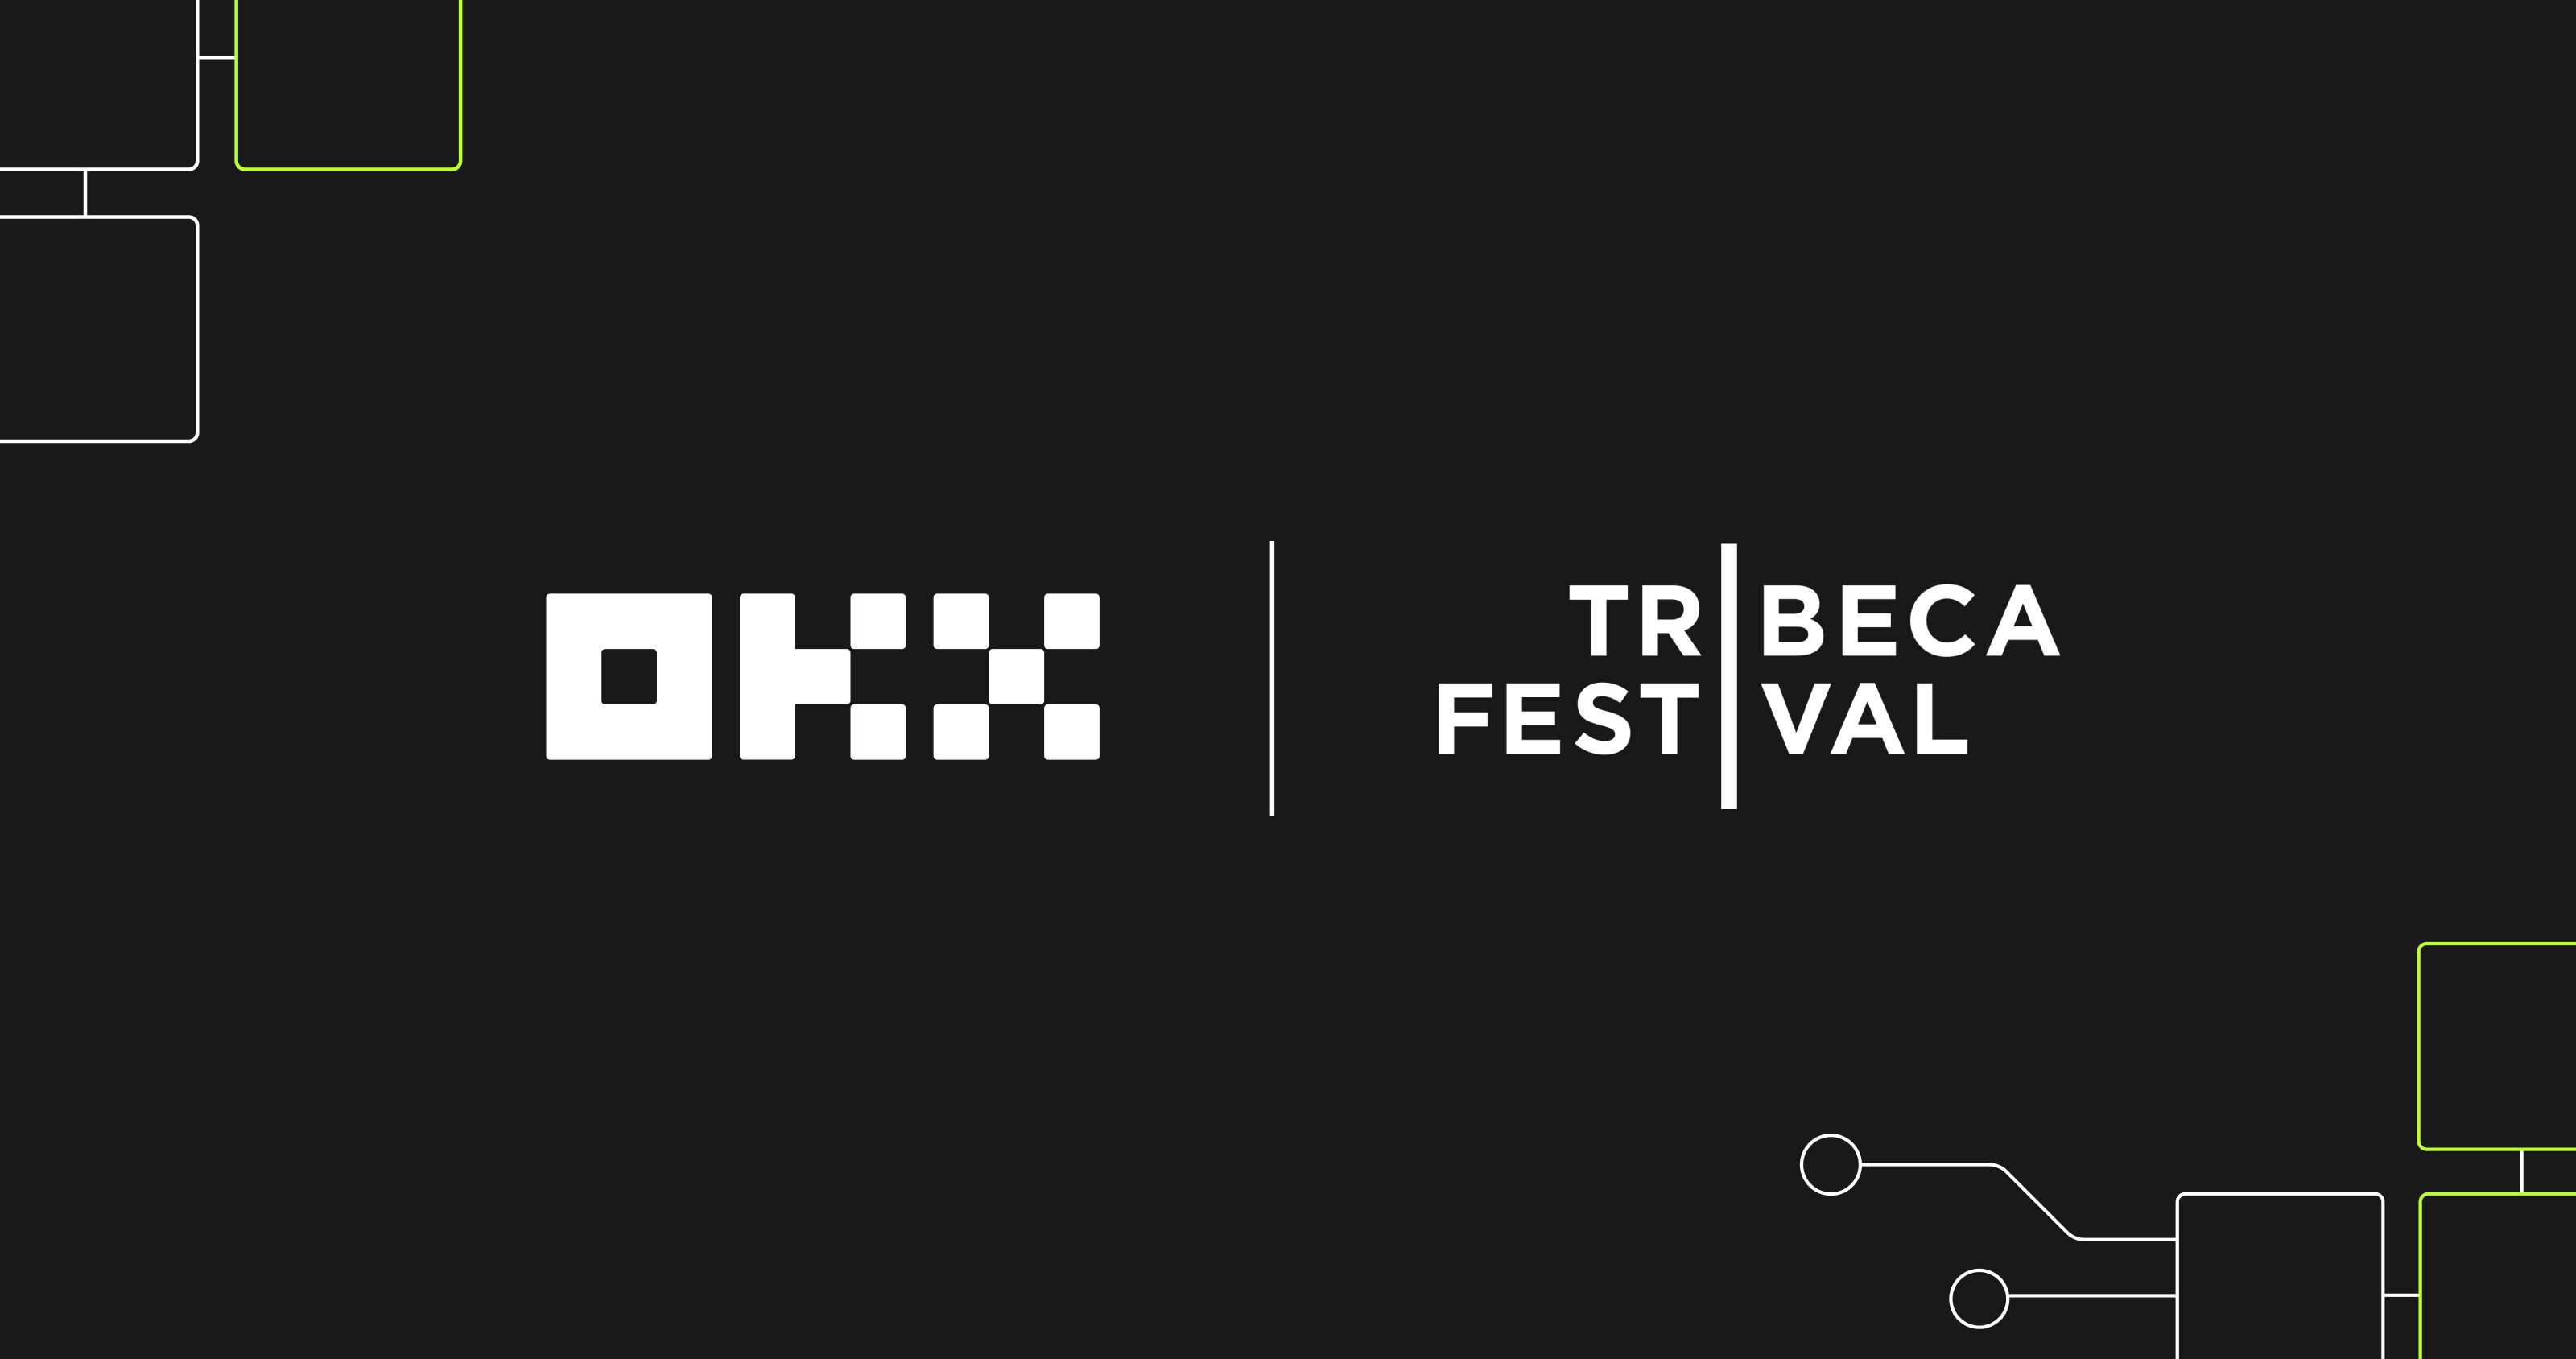 OKX Strengthens Partnership with Tribeca Festival in Second Consecutive Year as Event’s Presenting Partner